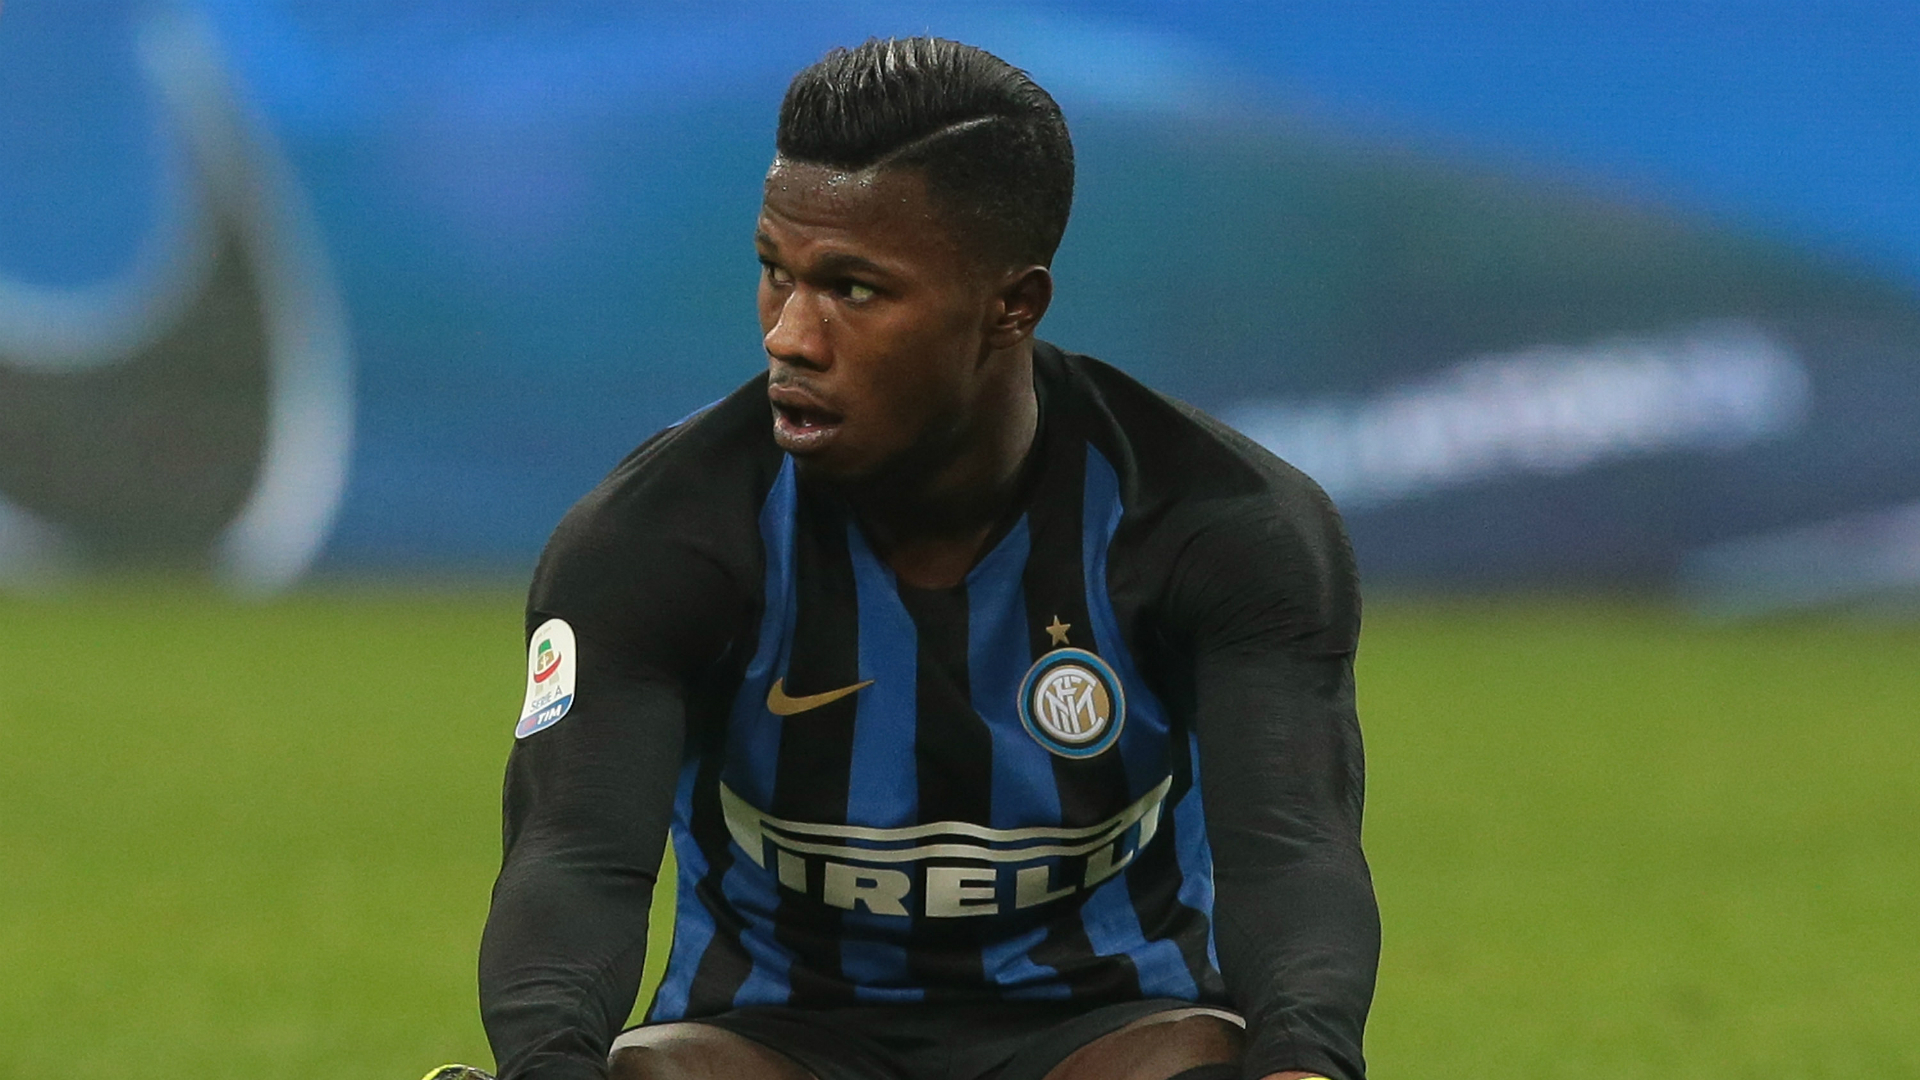 Inter are set to be without forward Keita Balde Diao for a spell after the forward injured his right thigh in training.